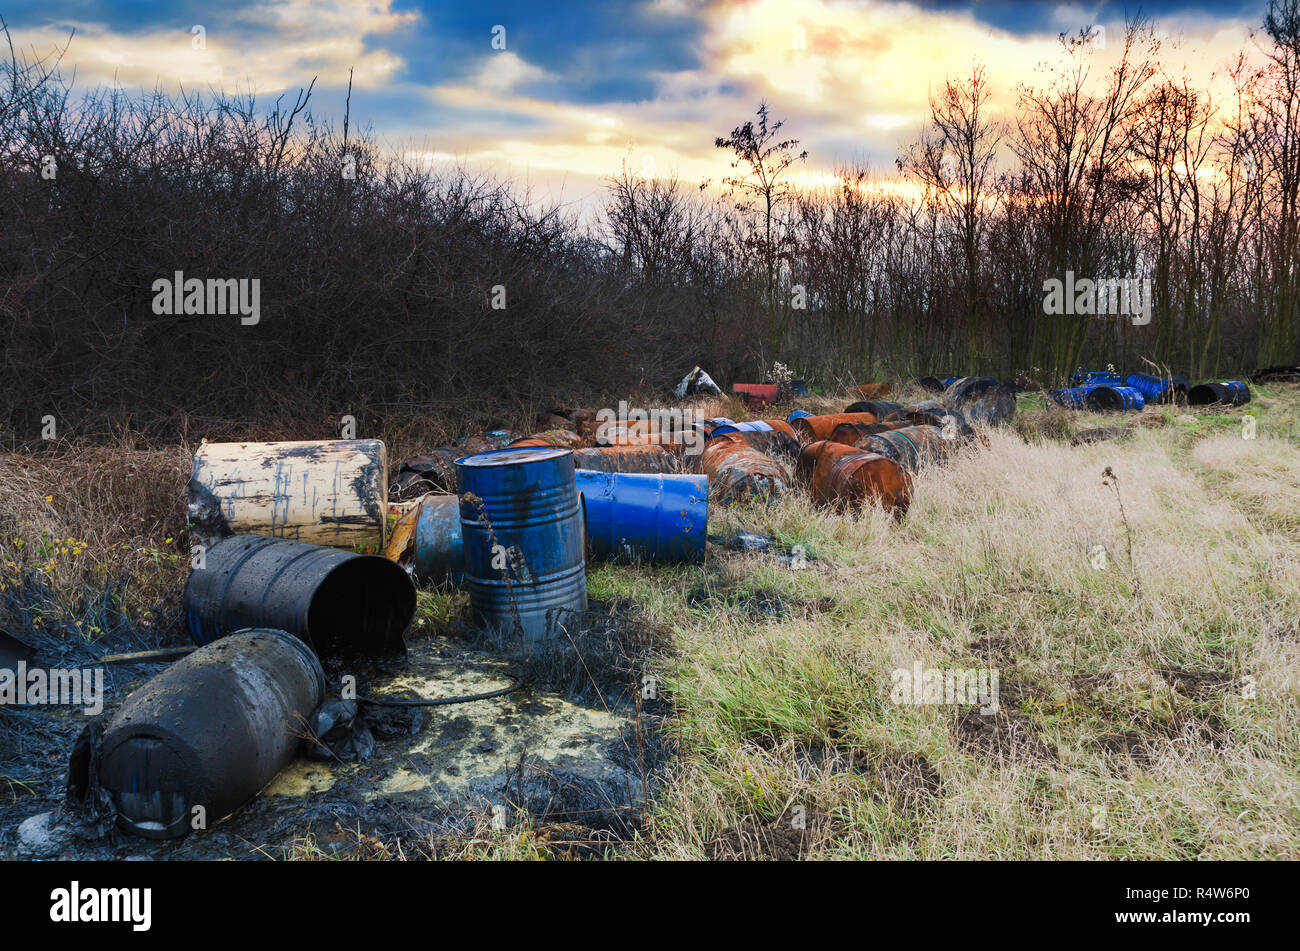 Barrels of toxic waste in nature with dramatic sunsets. Environmental pollution. Stock Photo